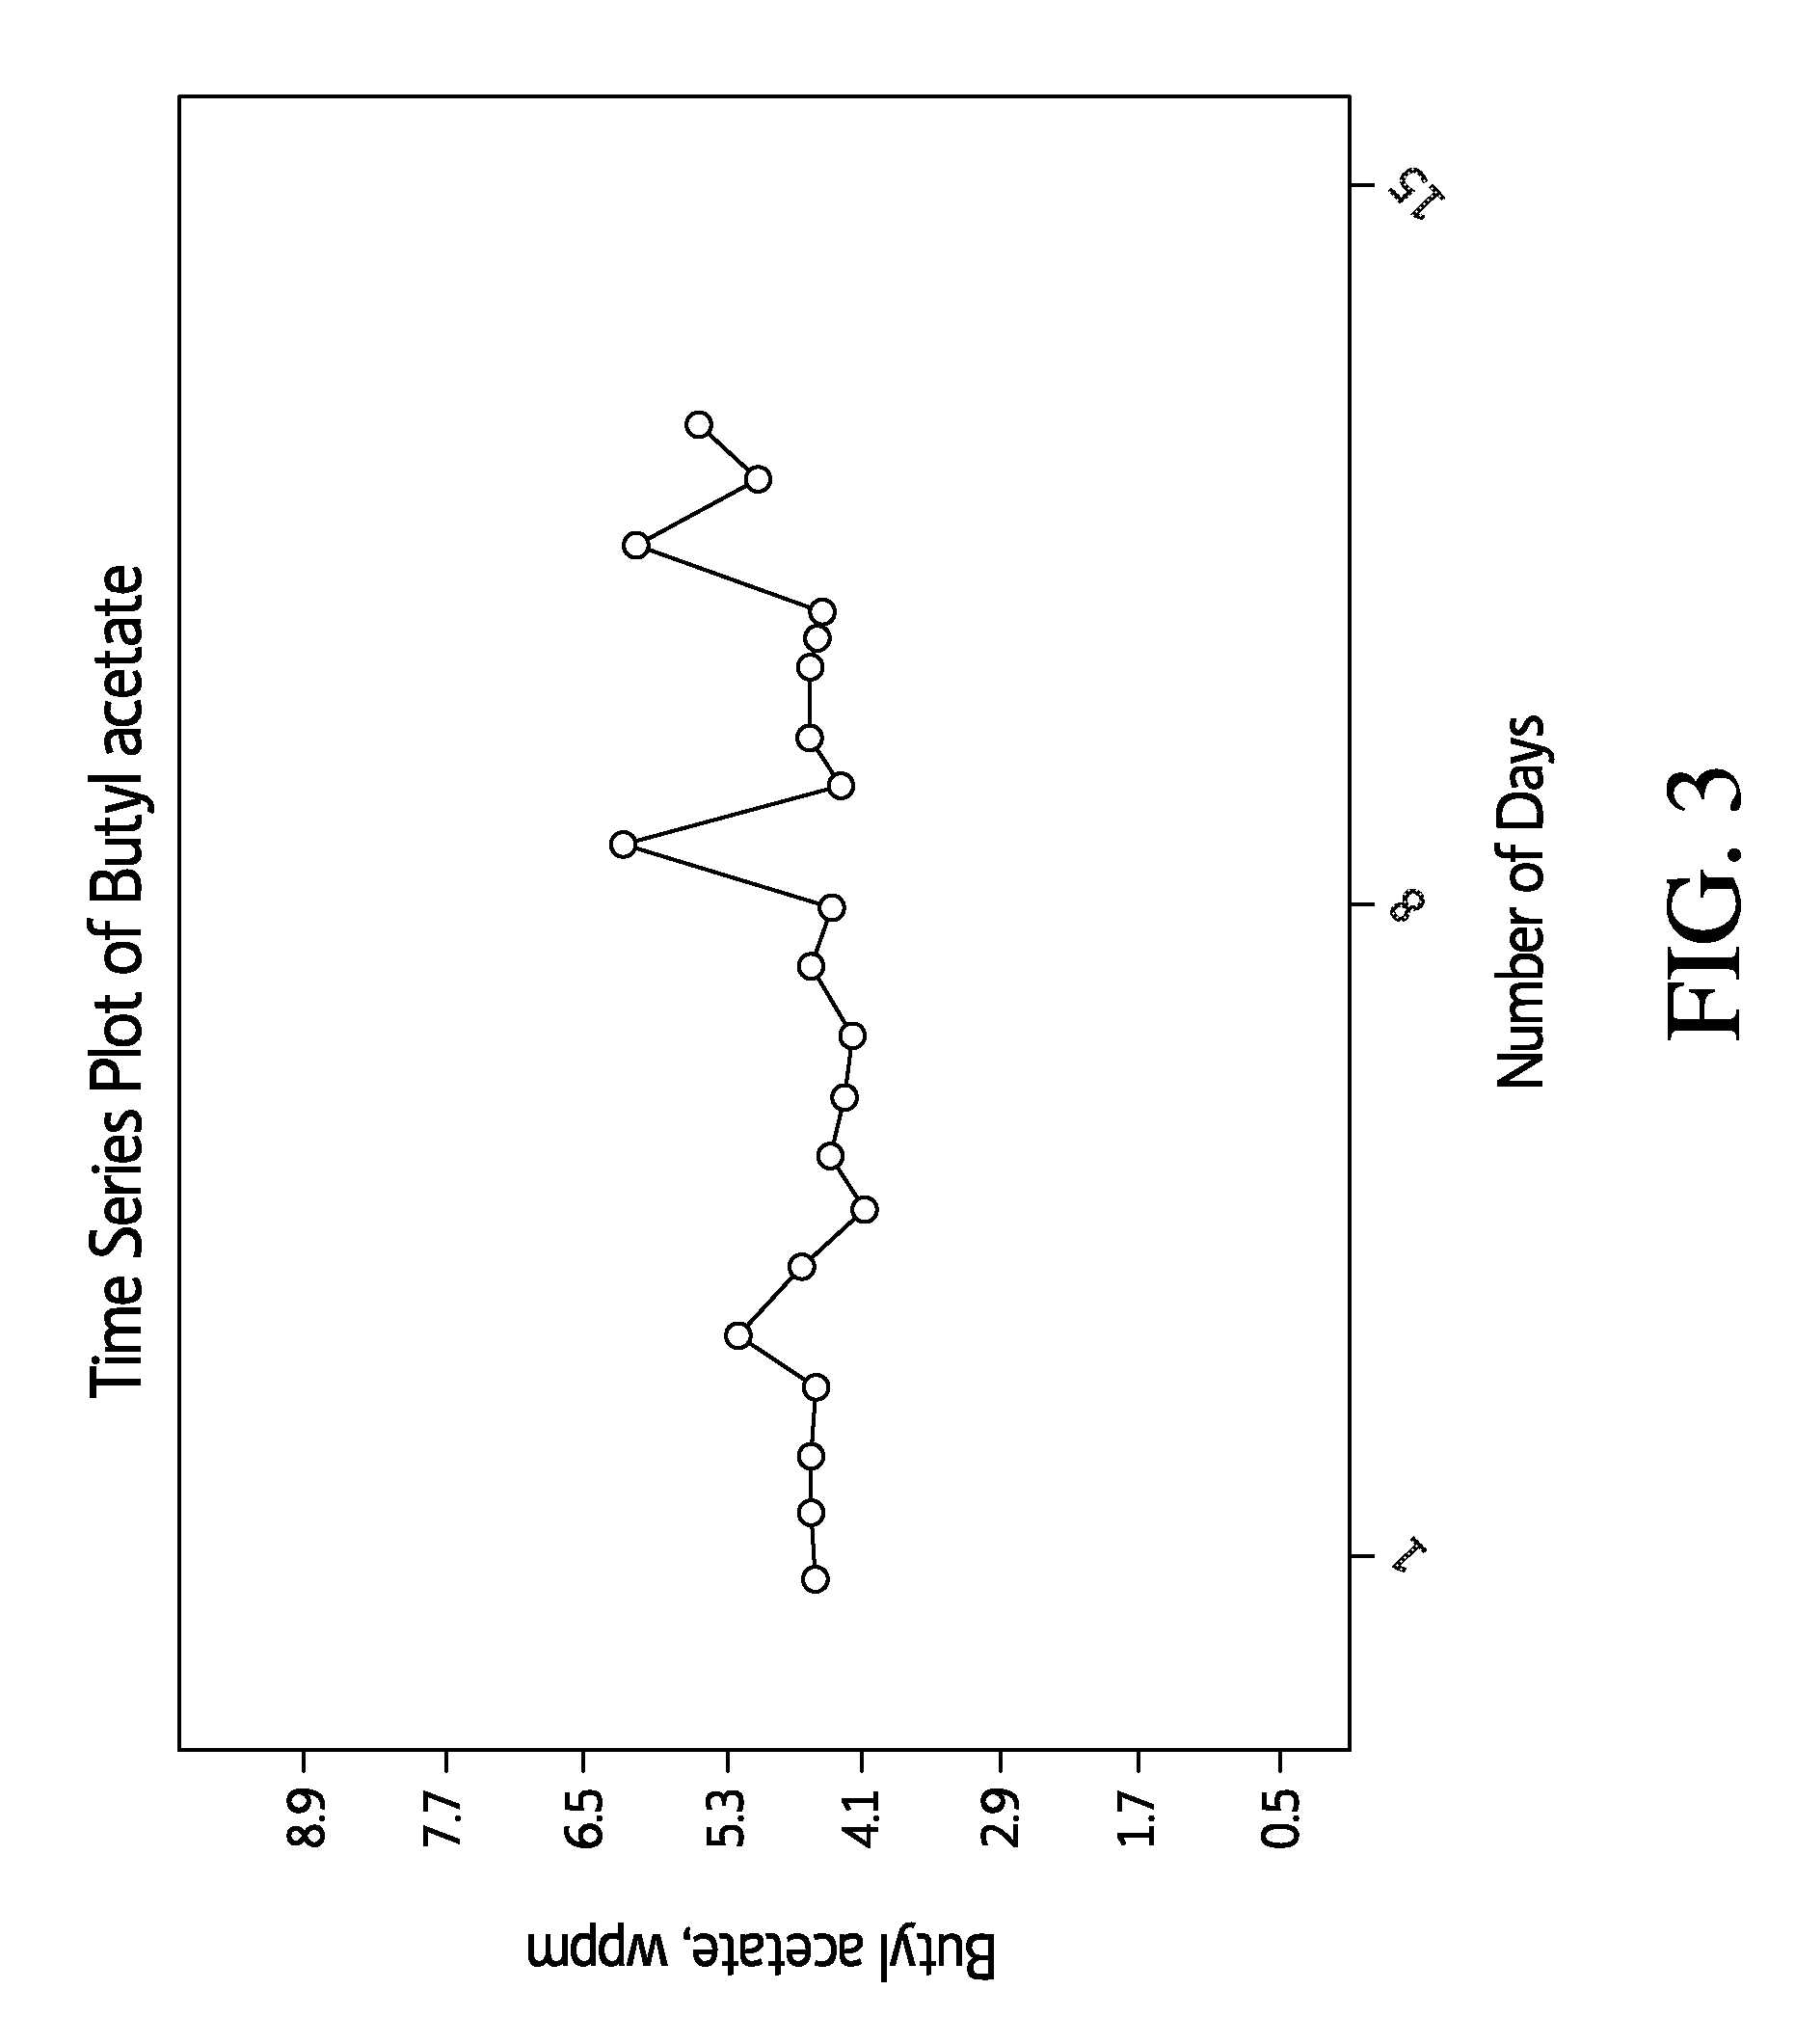 Processes for producing an acetic acid product having low butyl acetate content